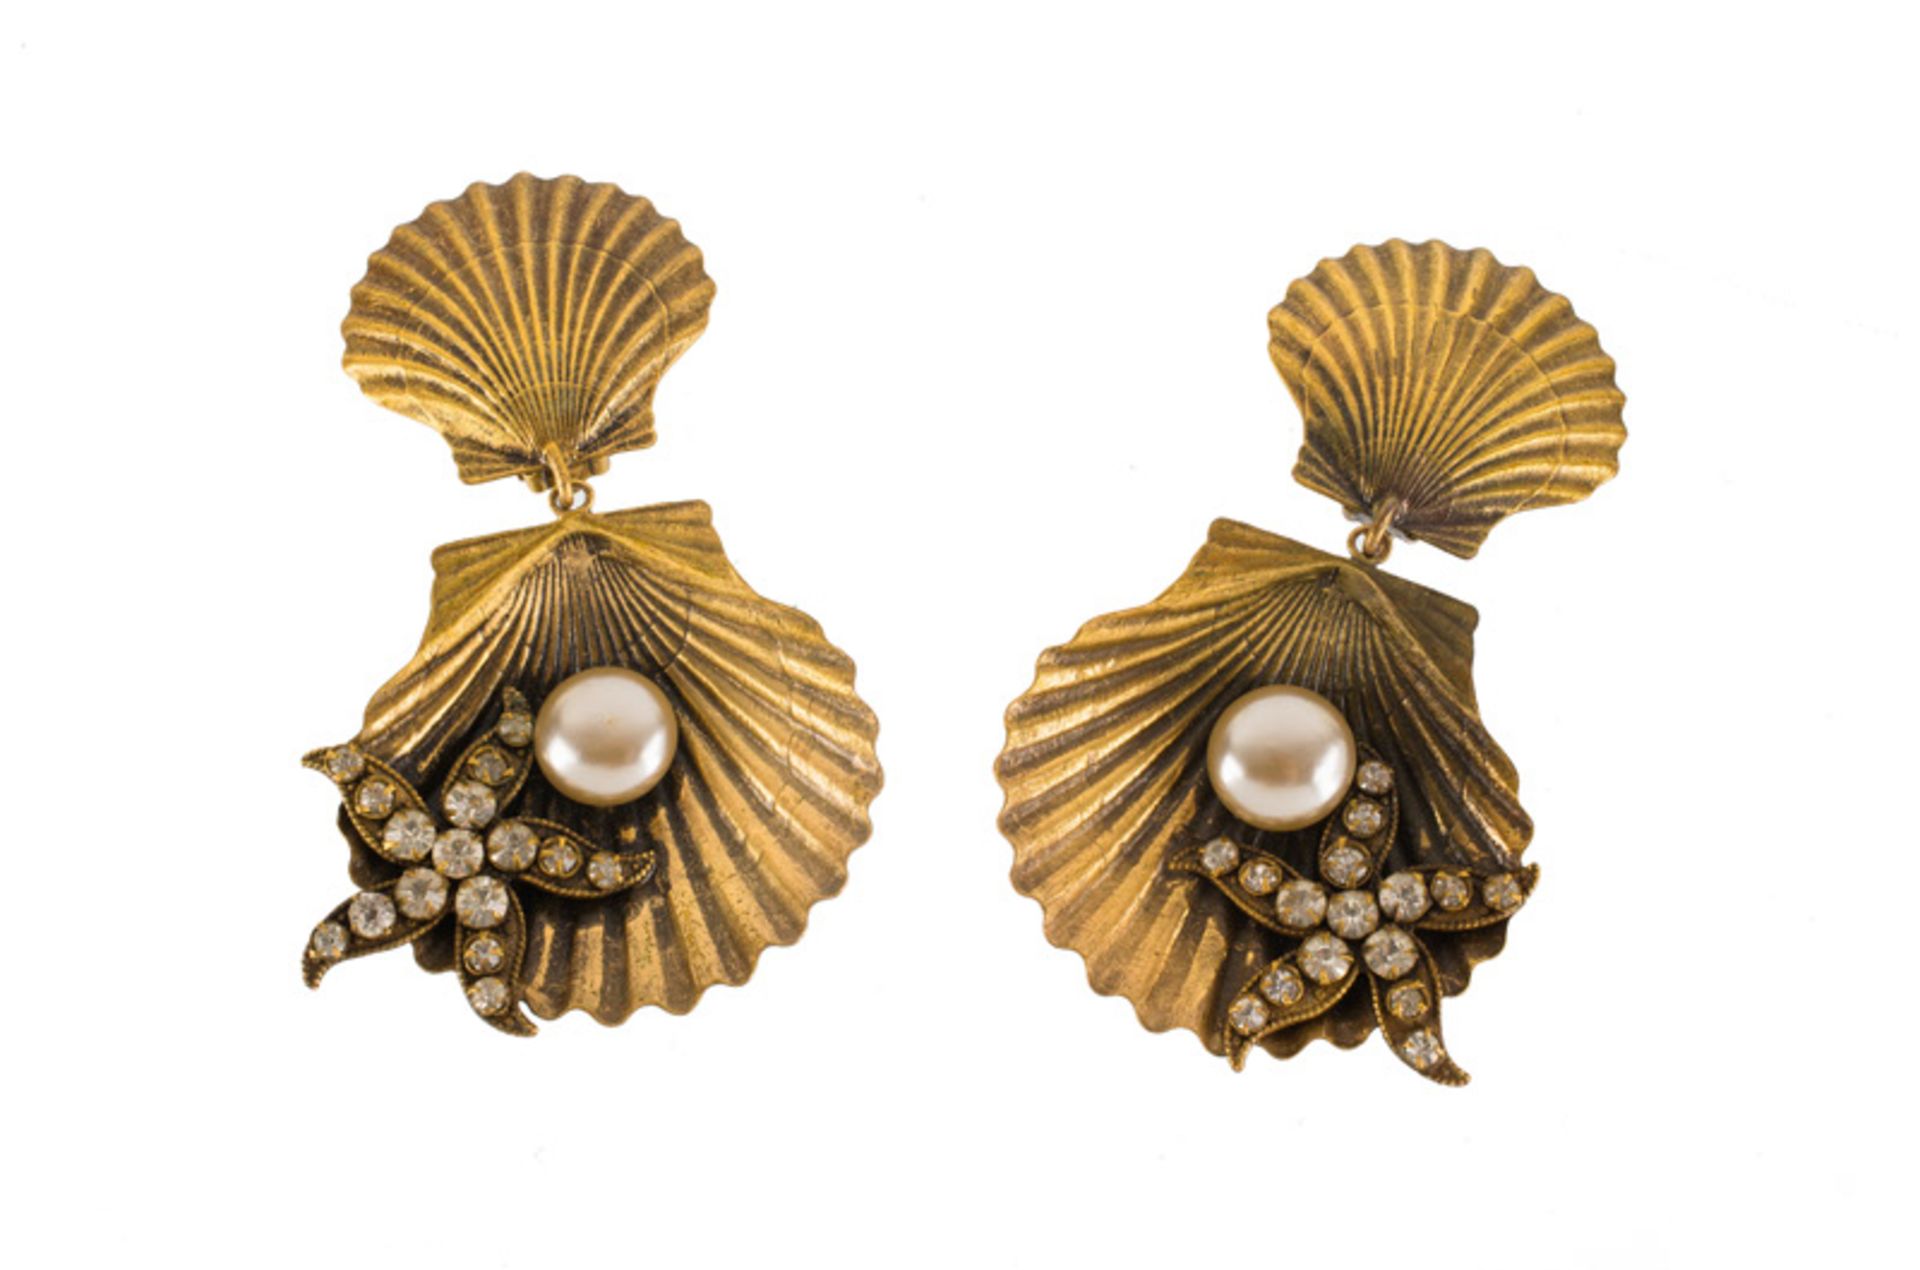 A Joseff Hollywood goldtone pair of earclips, depicting a shell and a starfish, set with rhinestones